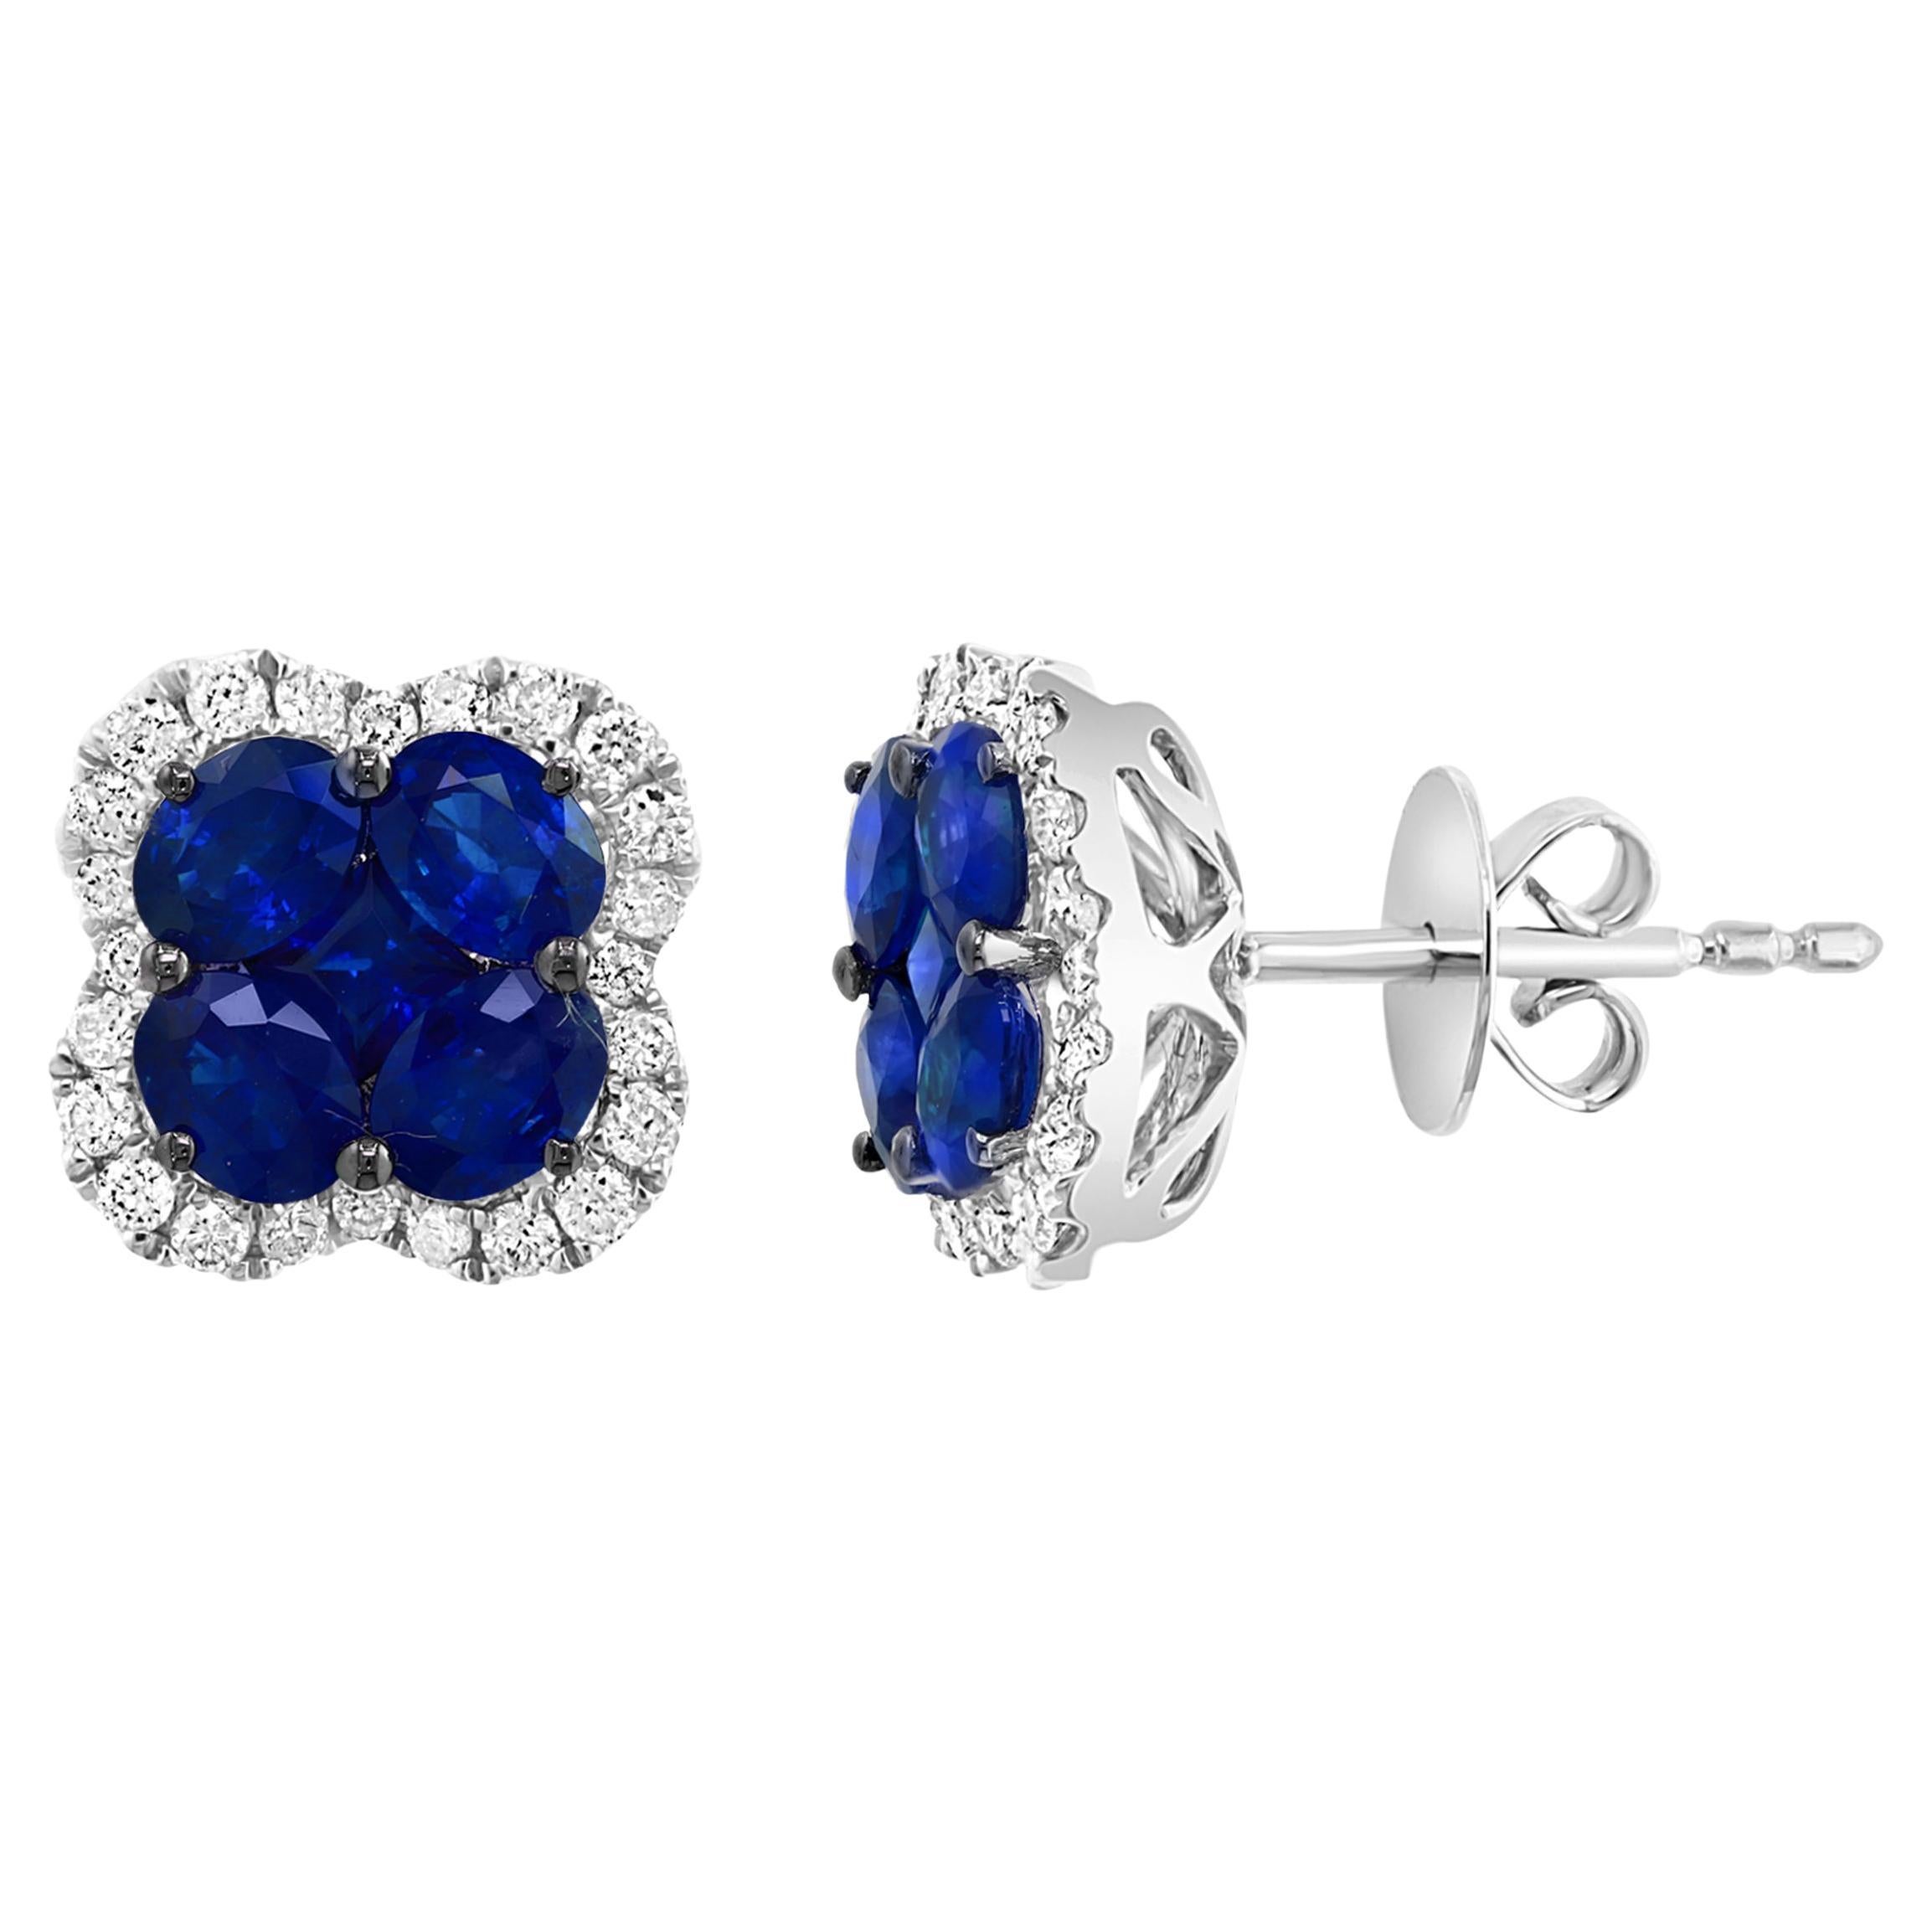 1.85 Carat Oval Cut Blue Sapphire and Diamond Stud Earrings in 18K White Gold